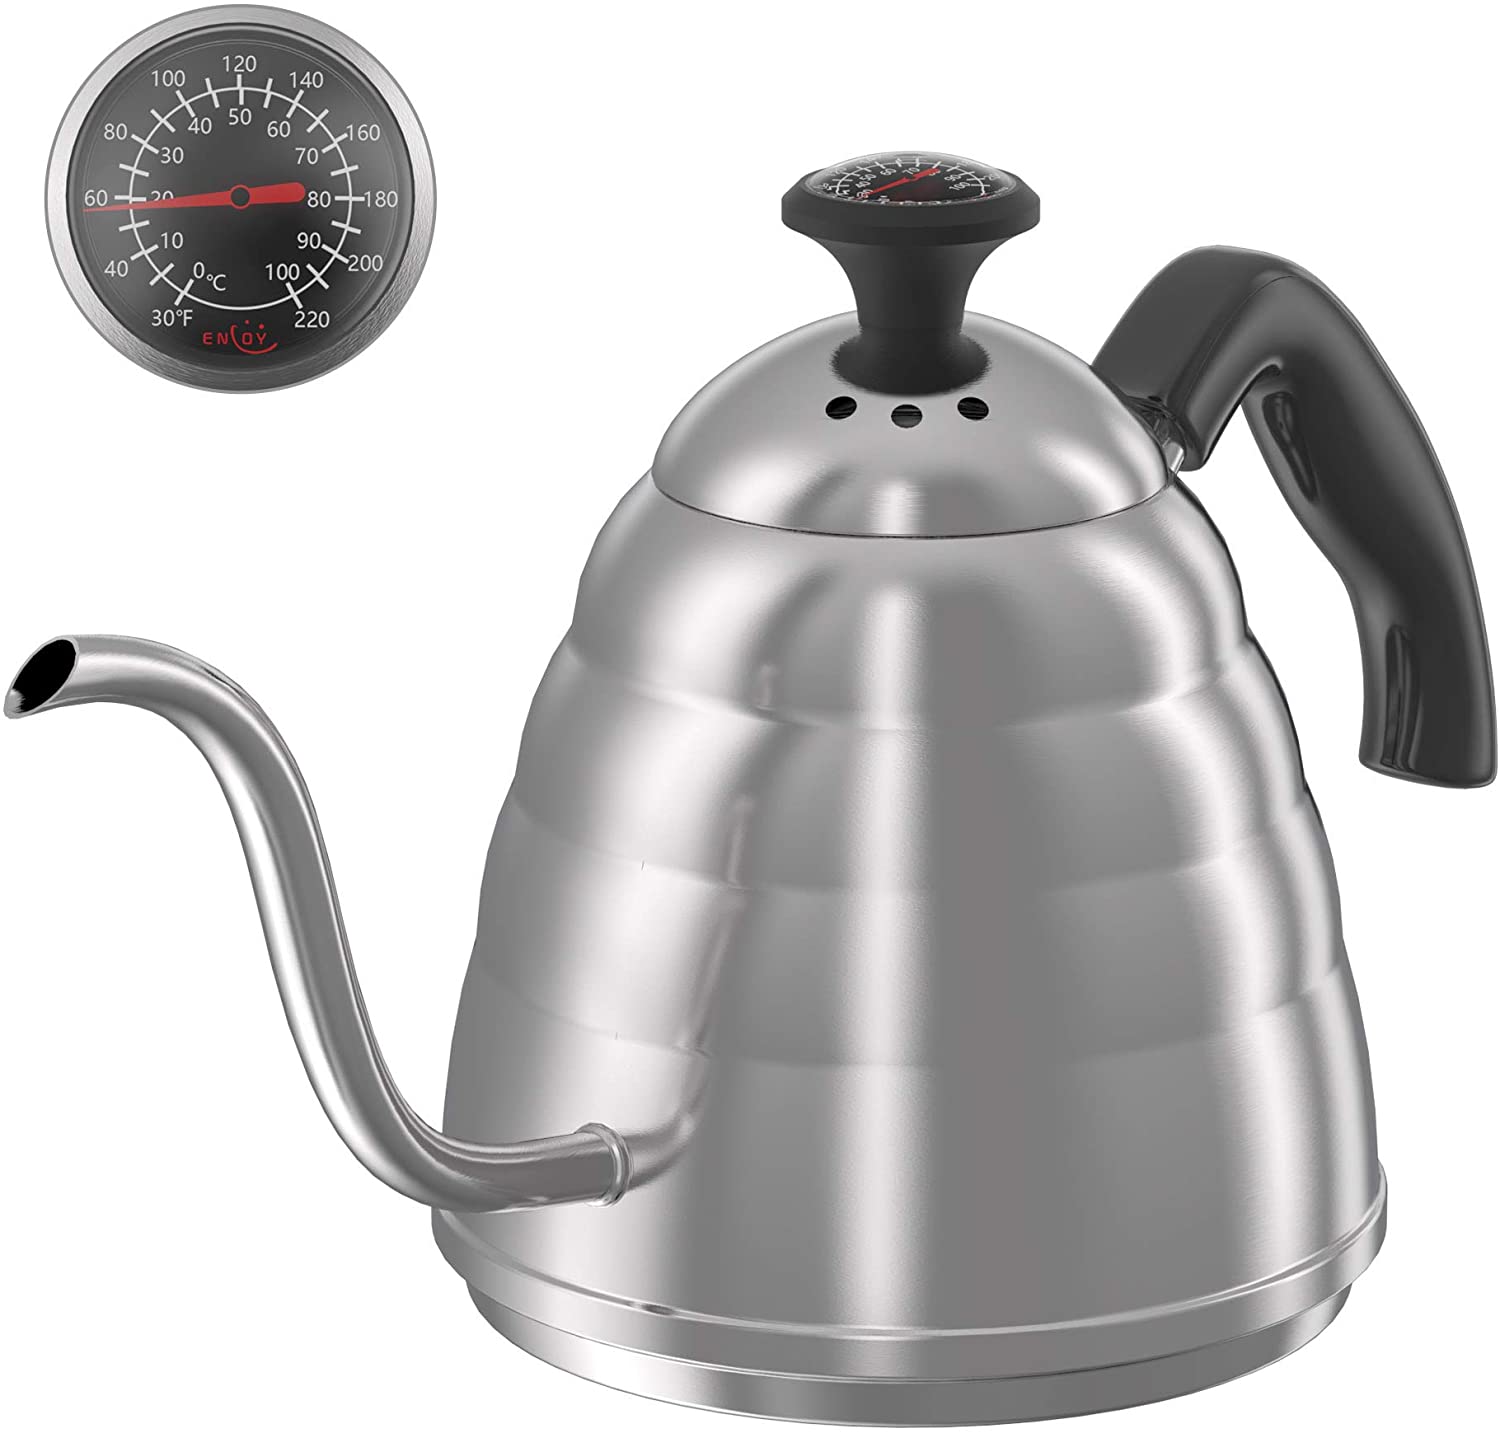 9. ENLOY Coffee Kettle for Drip Coffee and Tea 